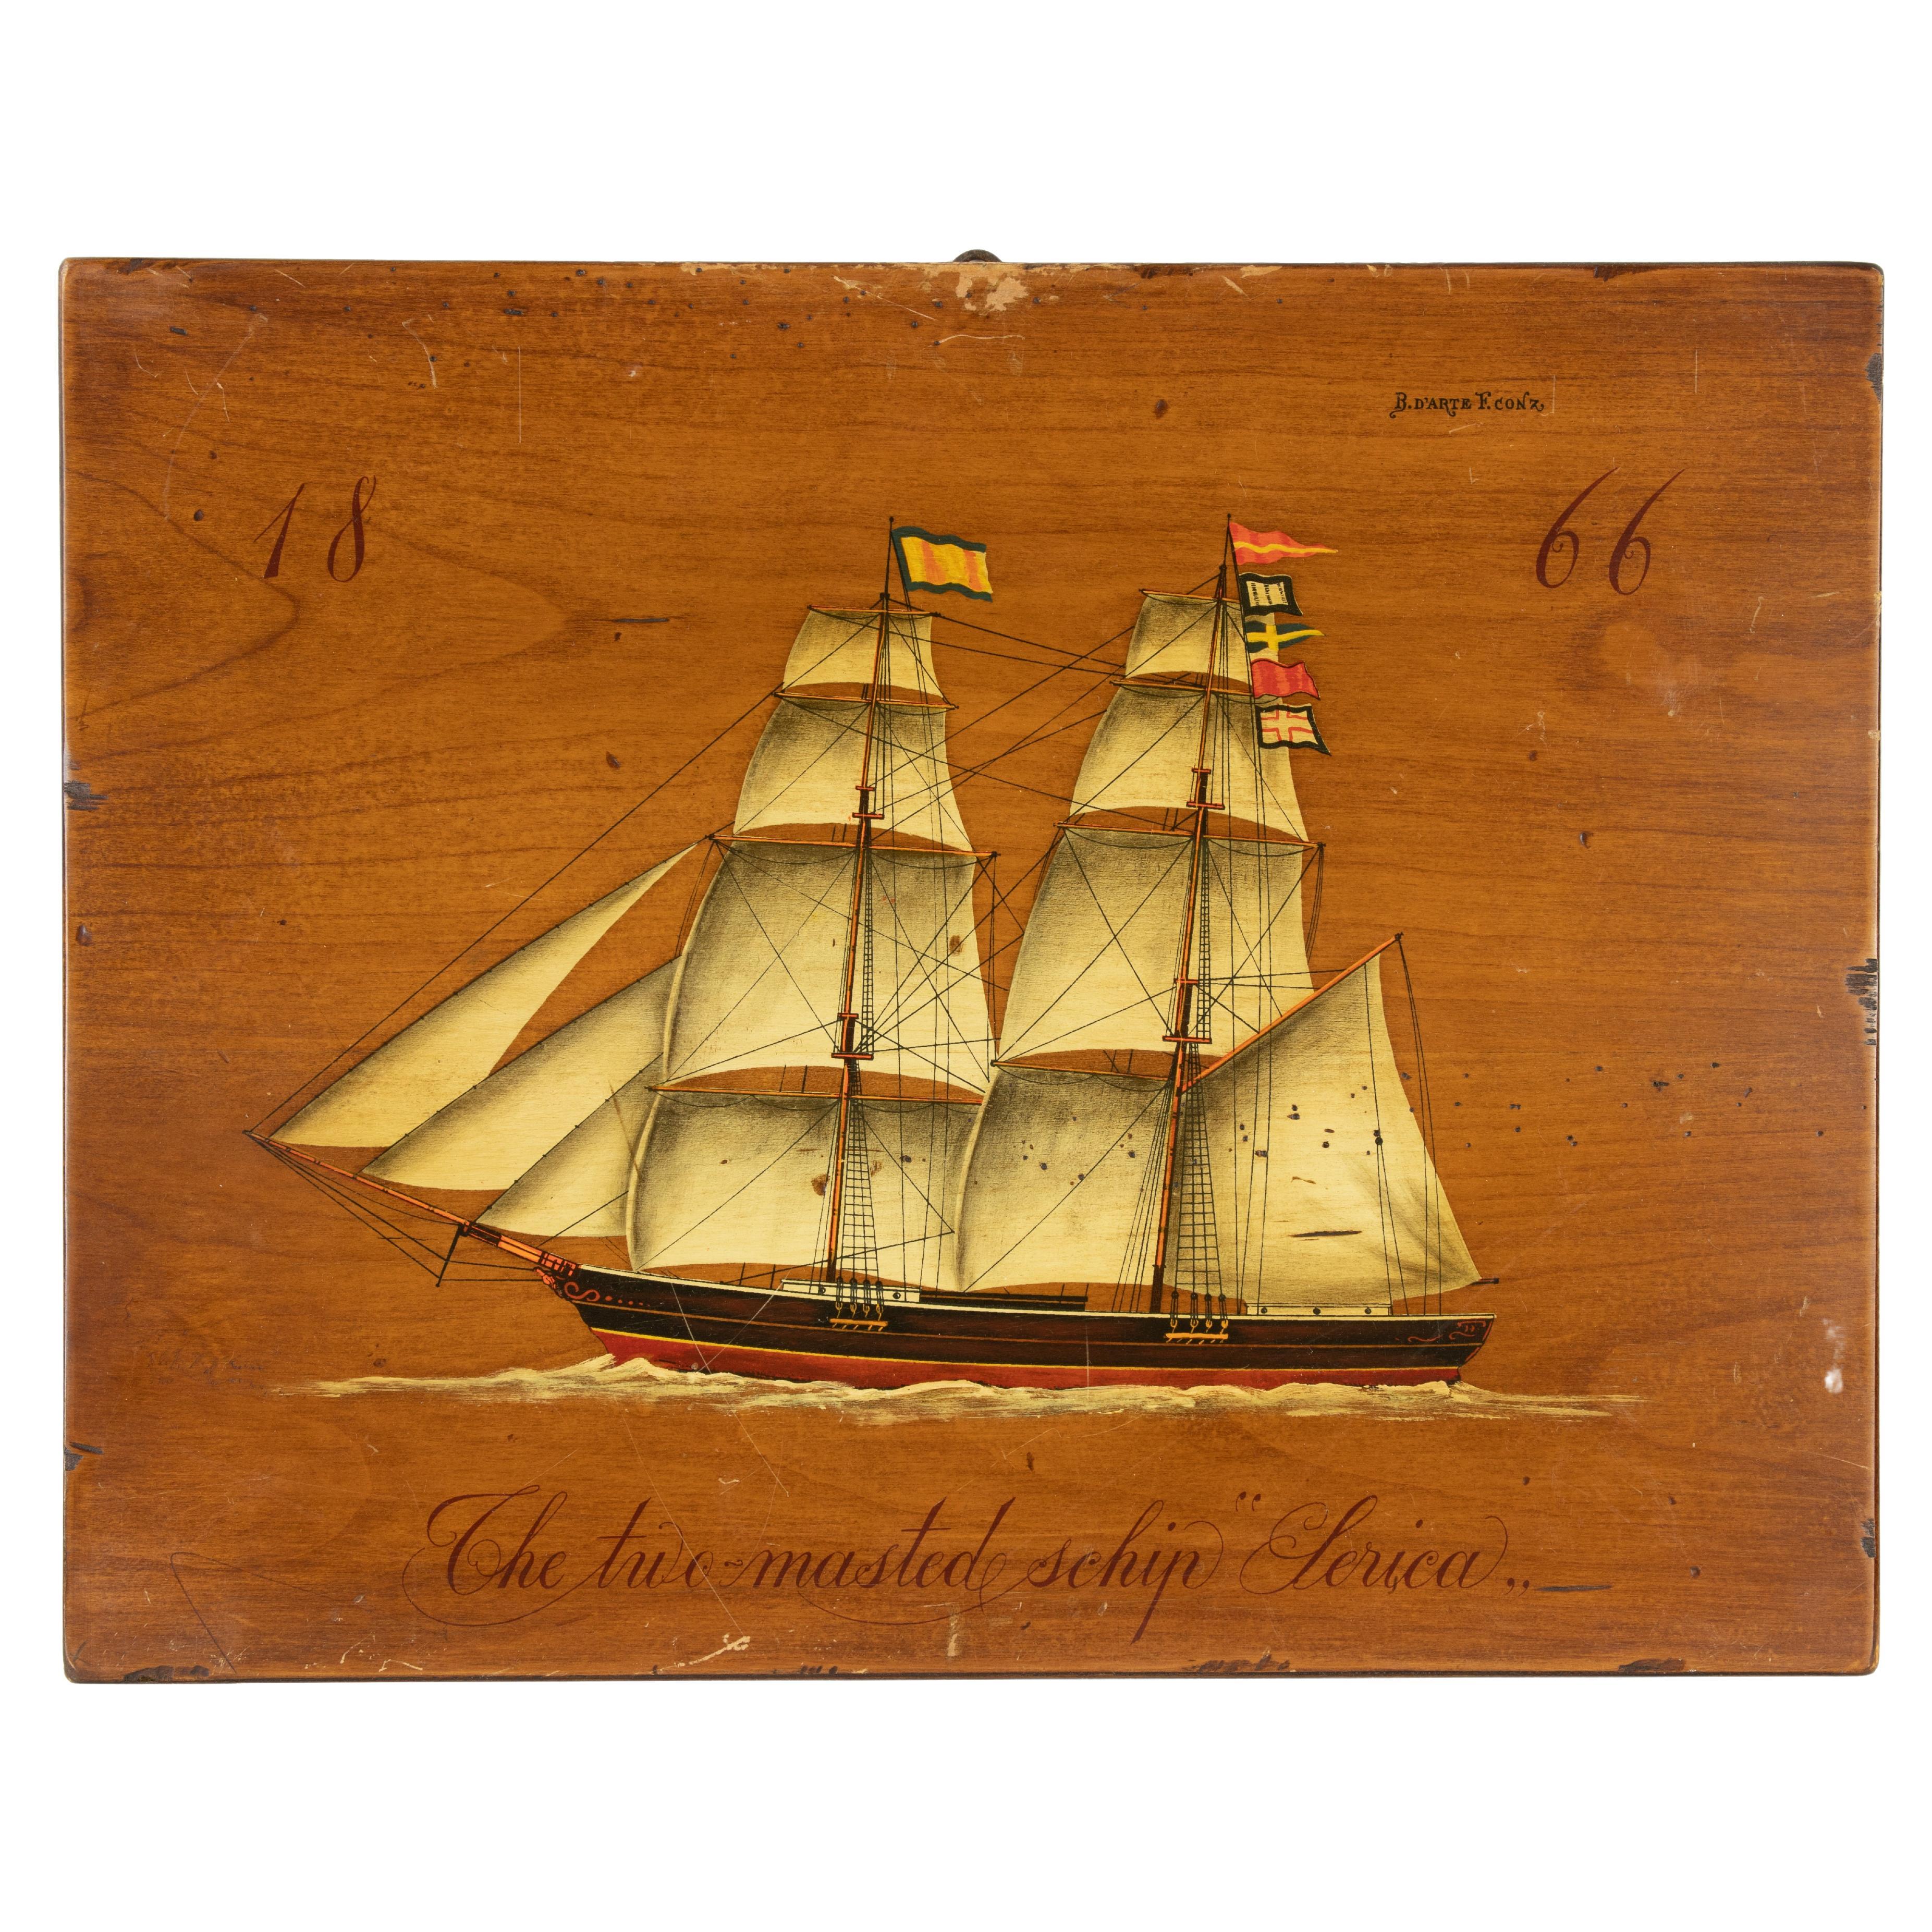  The Two Masted Ship Serica - Reproduction murale en vente